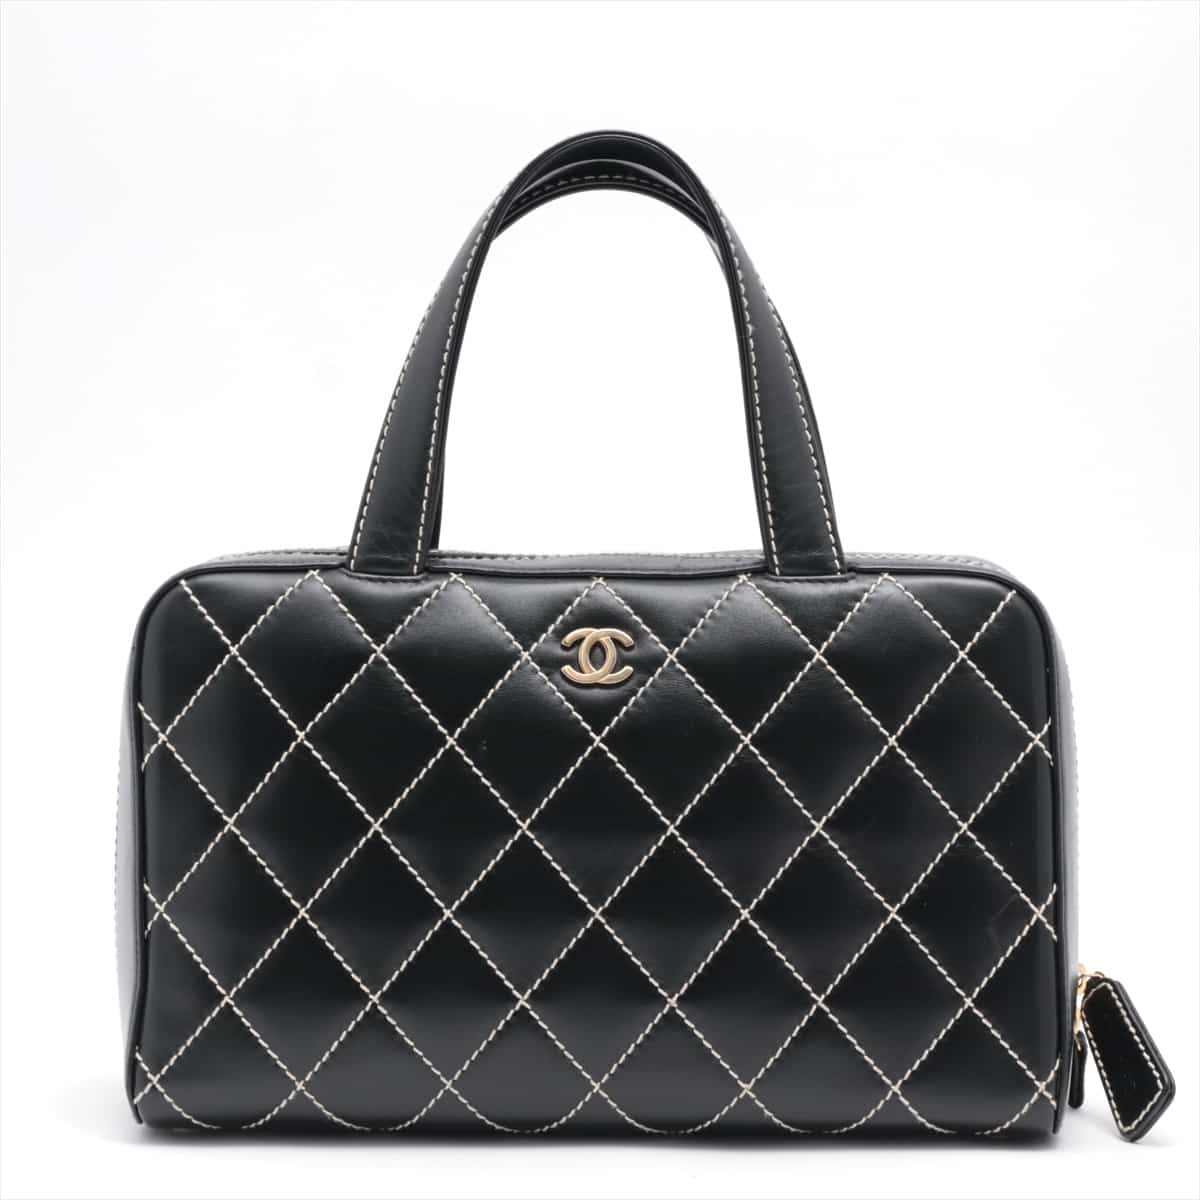 Chanel Wild Stitch Leather Hand bag Black Gold Metal fittings 7XXXXXX Comes with divider pouch